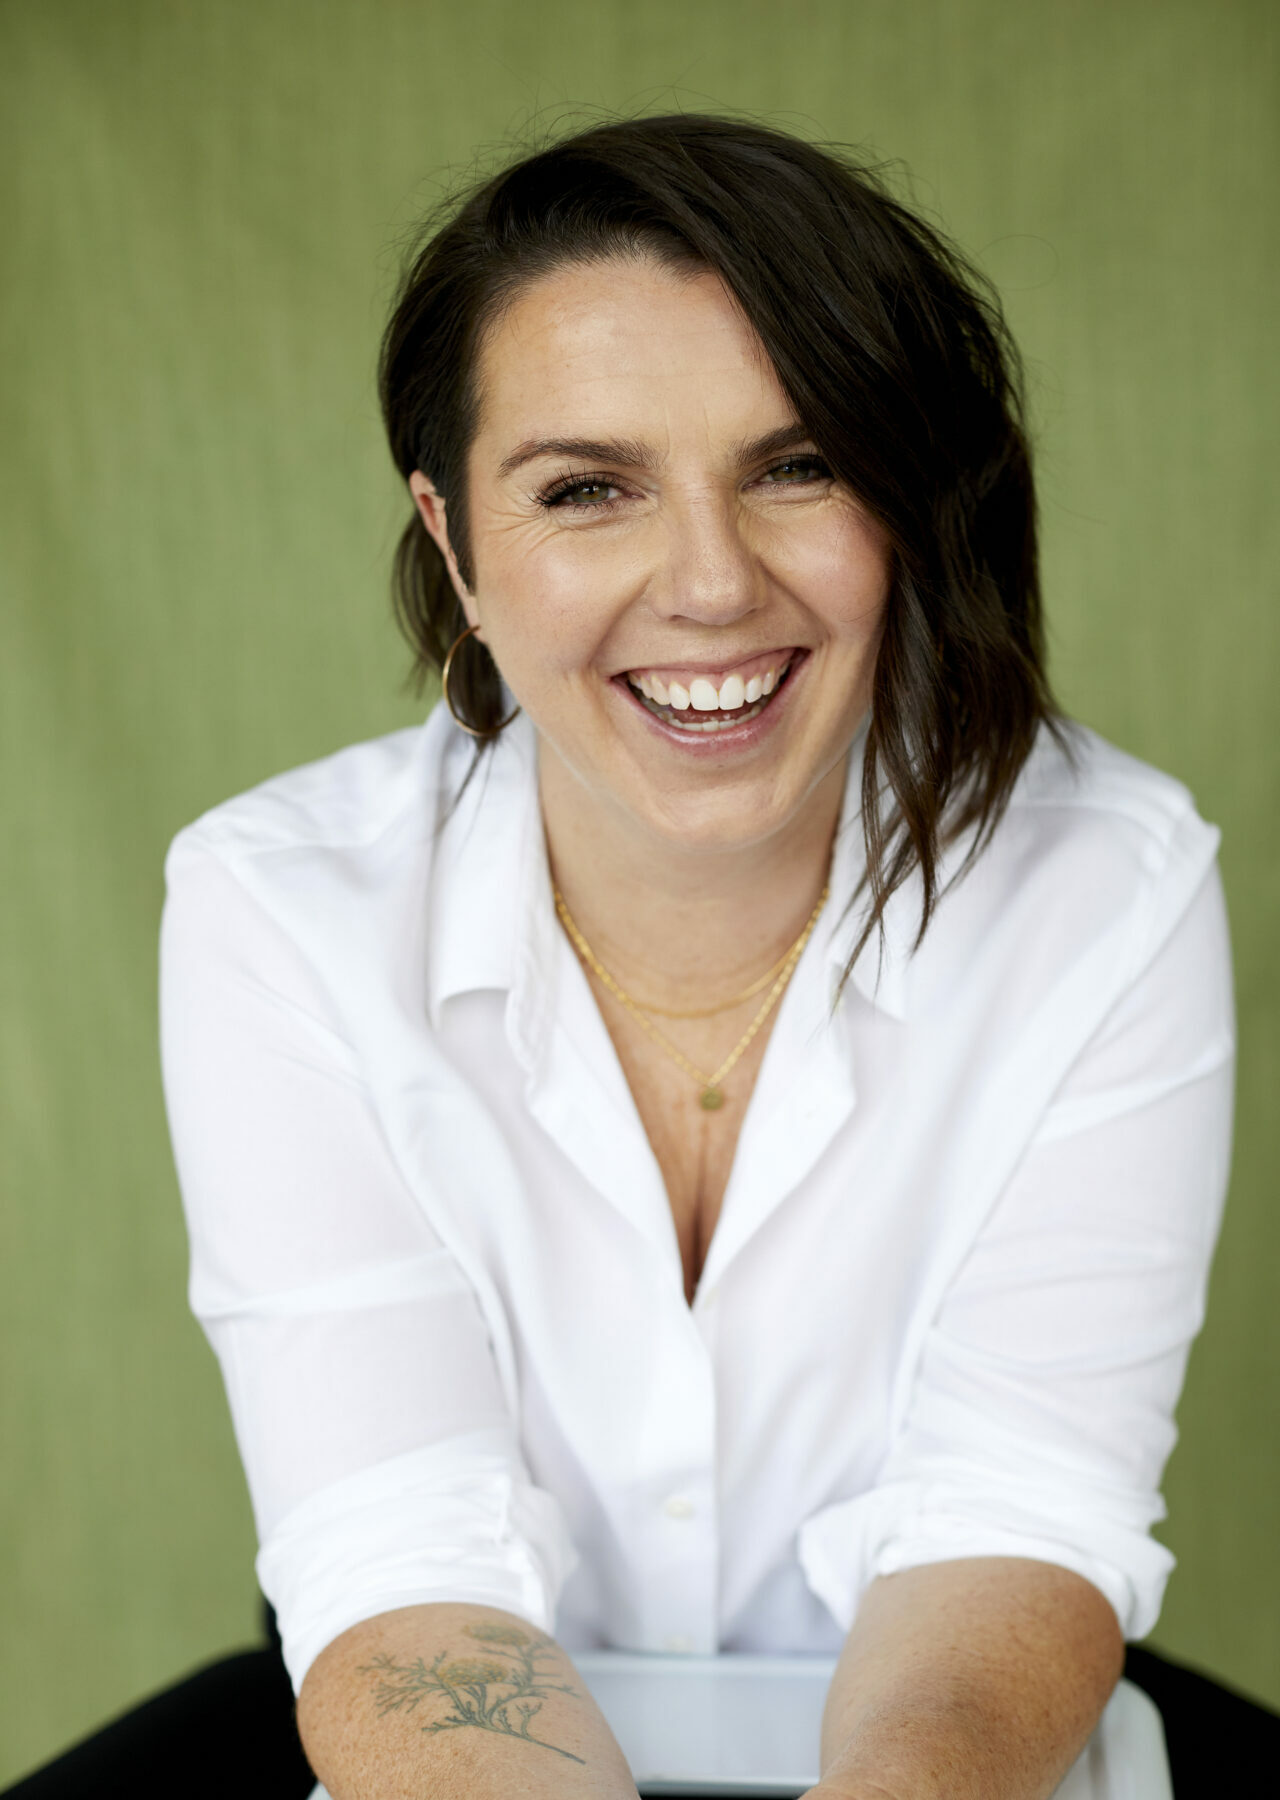 A photograph of a laughing white woman with shoulder length straight dark hair and a white blouse